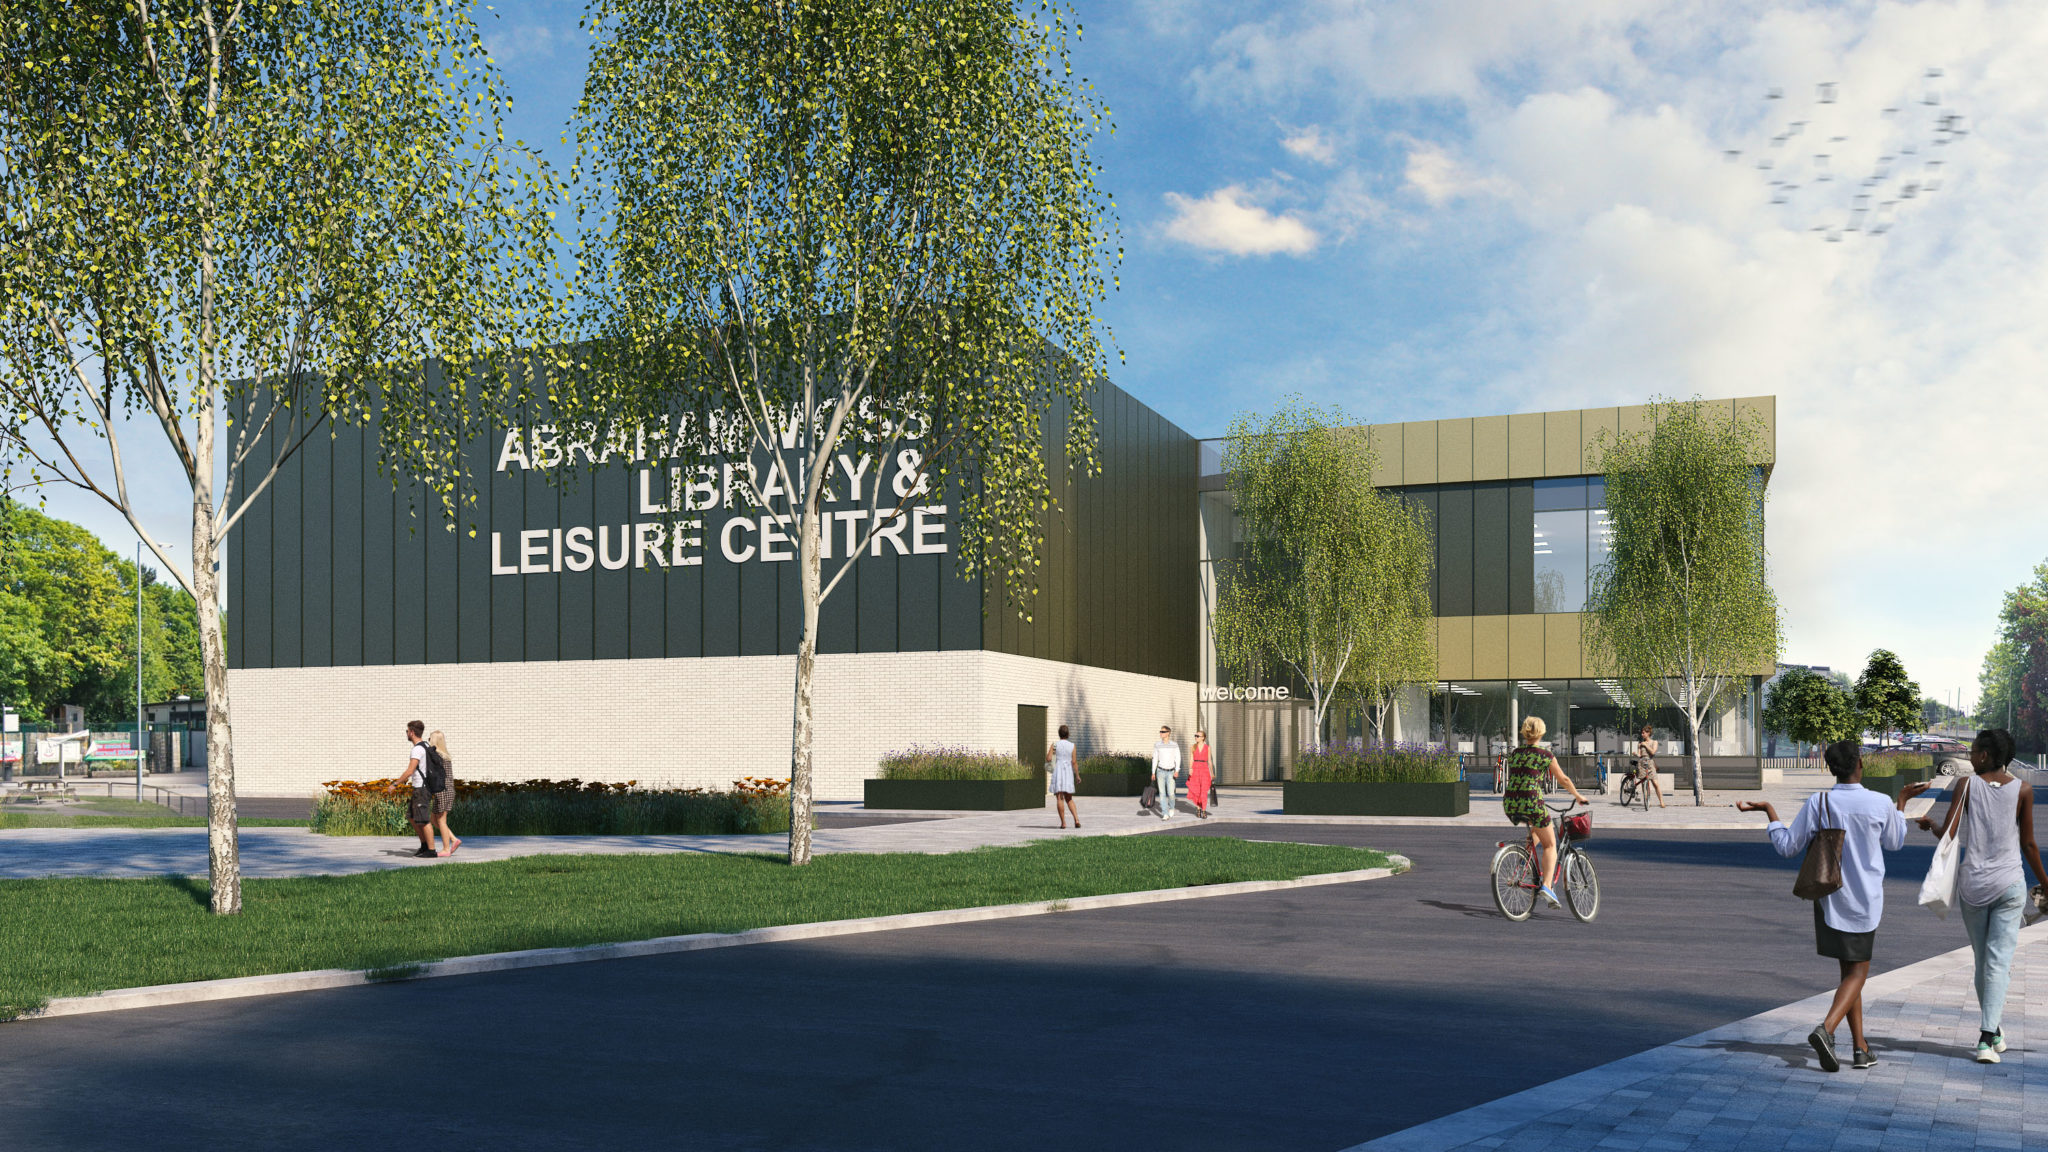 Abraham Moss Library & Leisure Centre